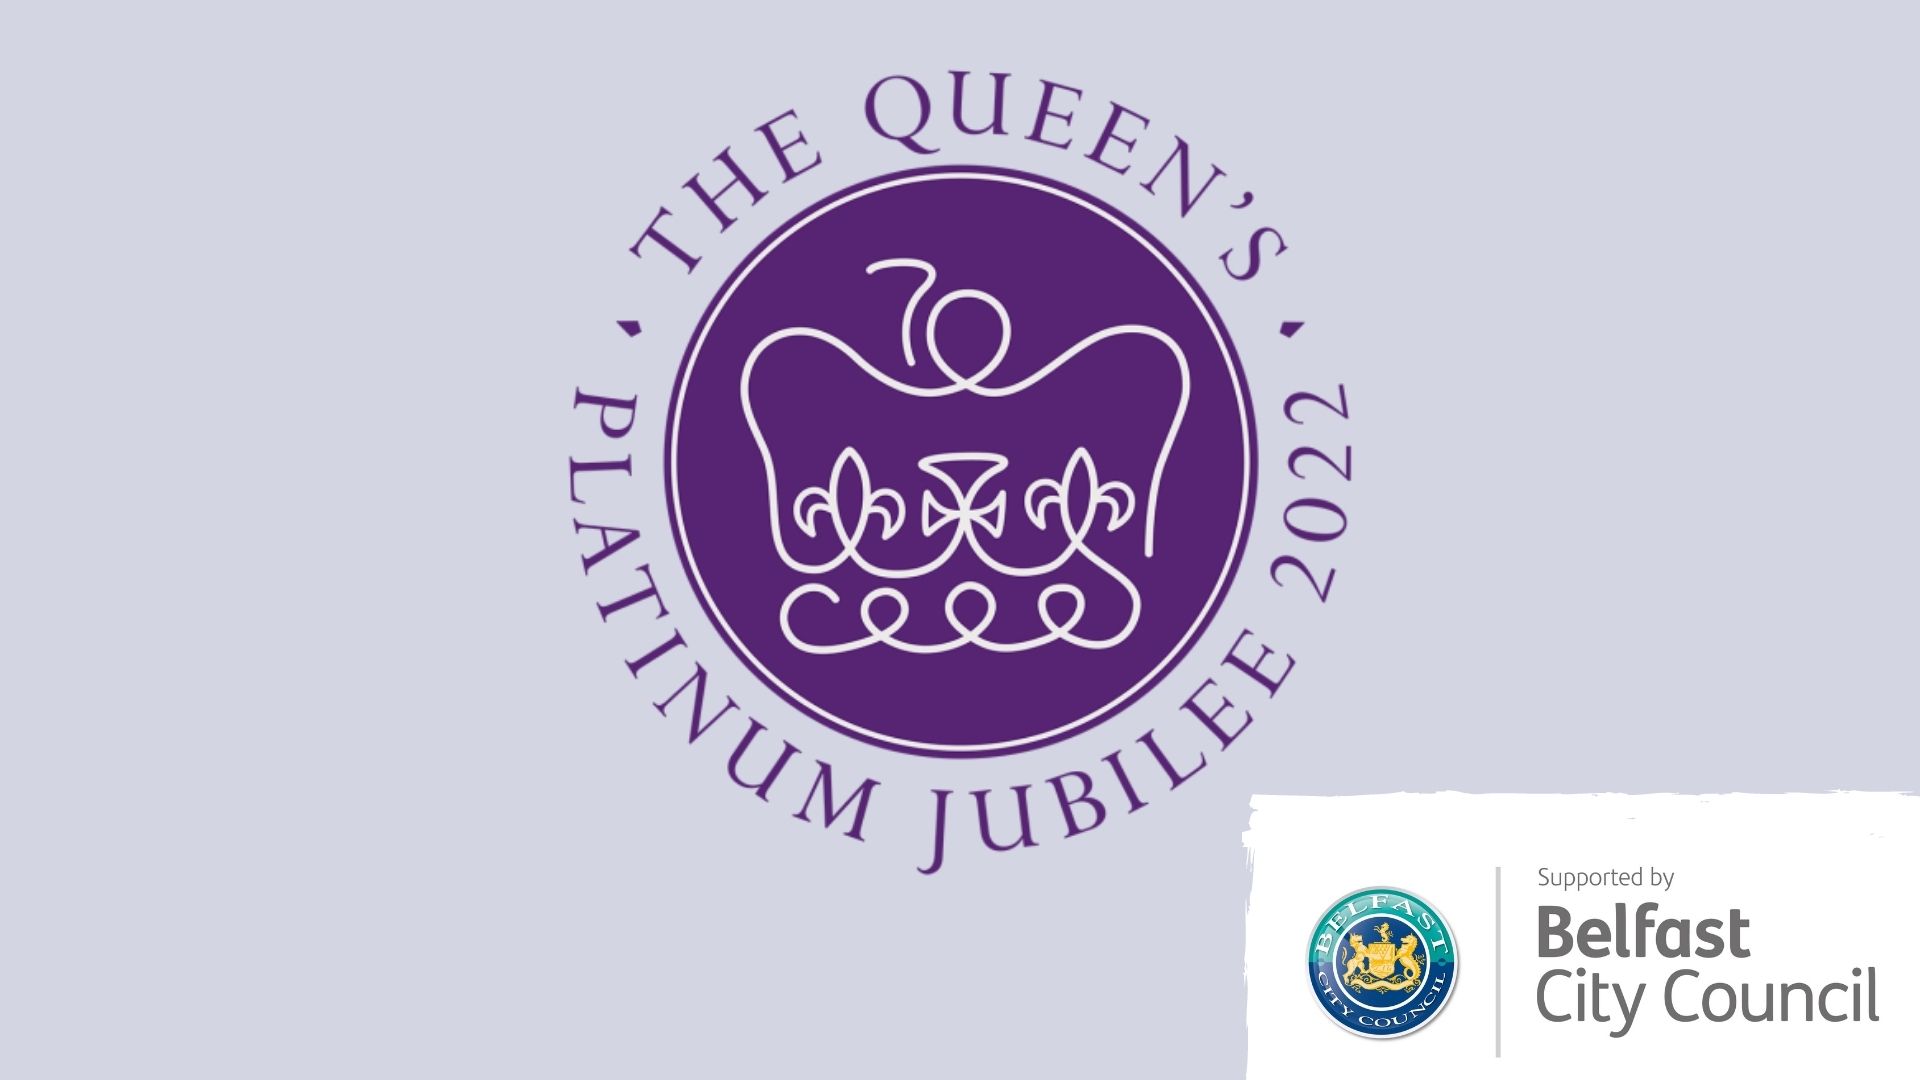 Her Majesty The Queen’s Platinum Jubilee Fund for Belfast